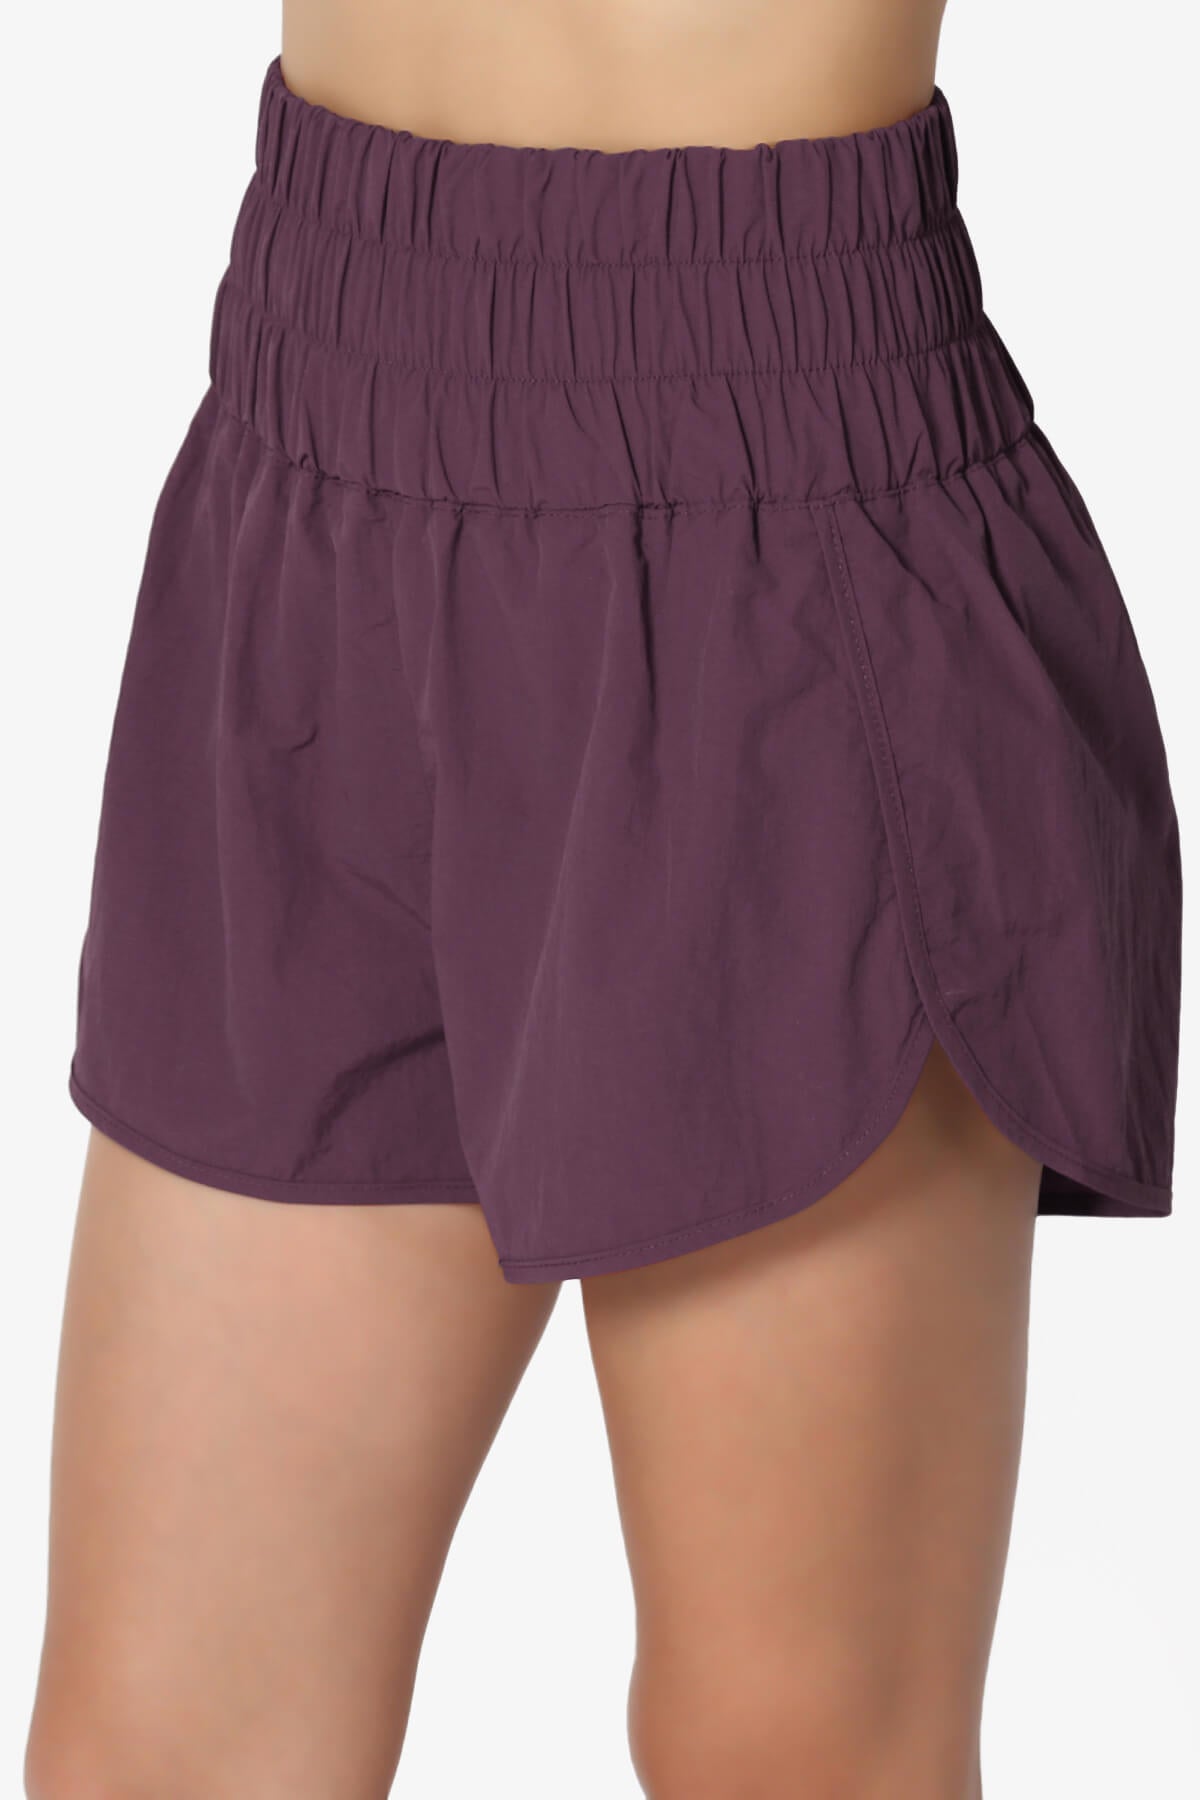 The Way Home Running Shorts DUSTY PLUM_5